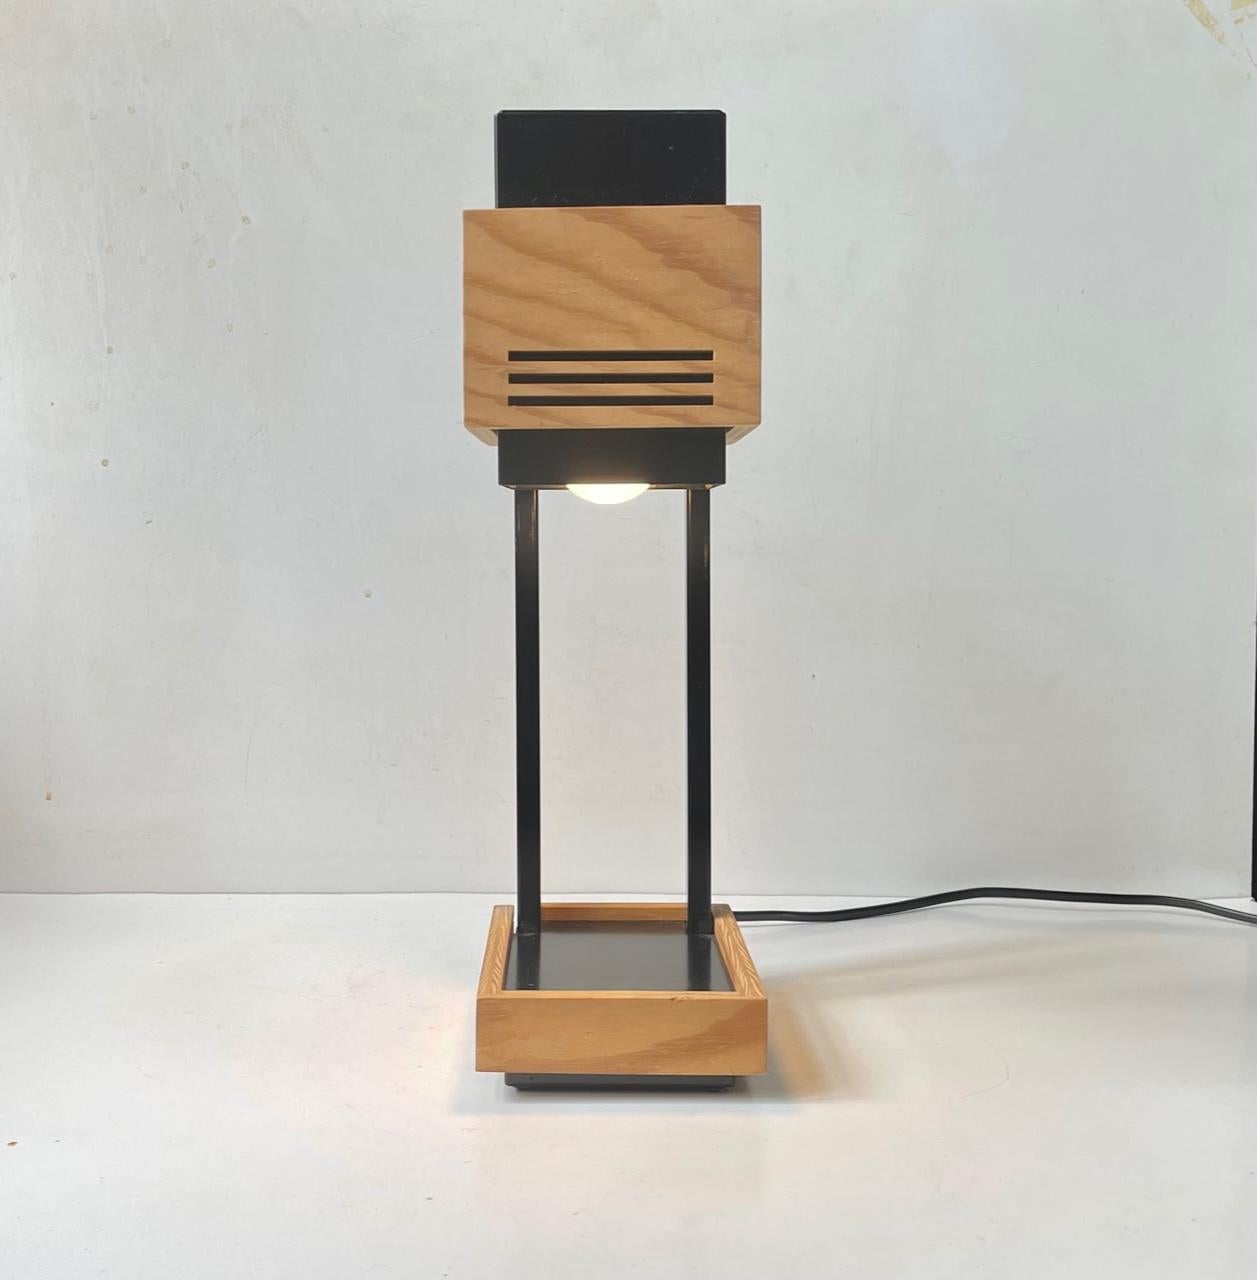 Scandinavian Modern Claus Bolby Cubist Table Lamp in Plywood and Steel for Cebo Industri, 1970s For Sale